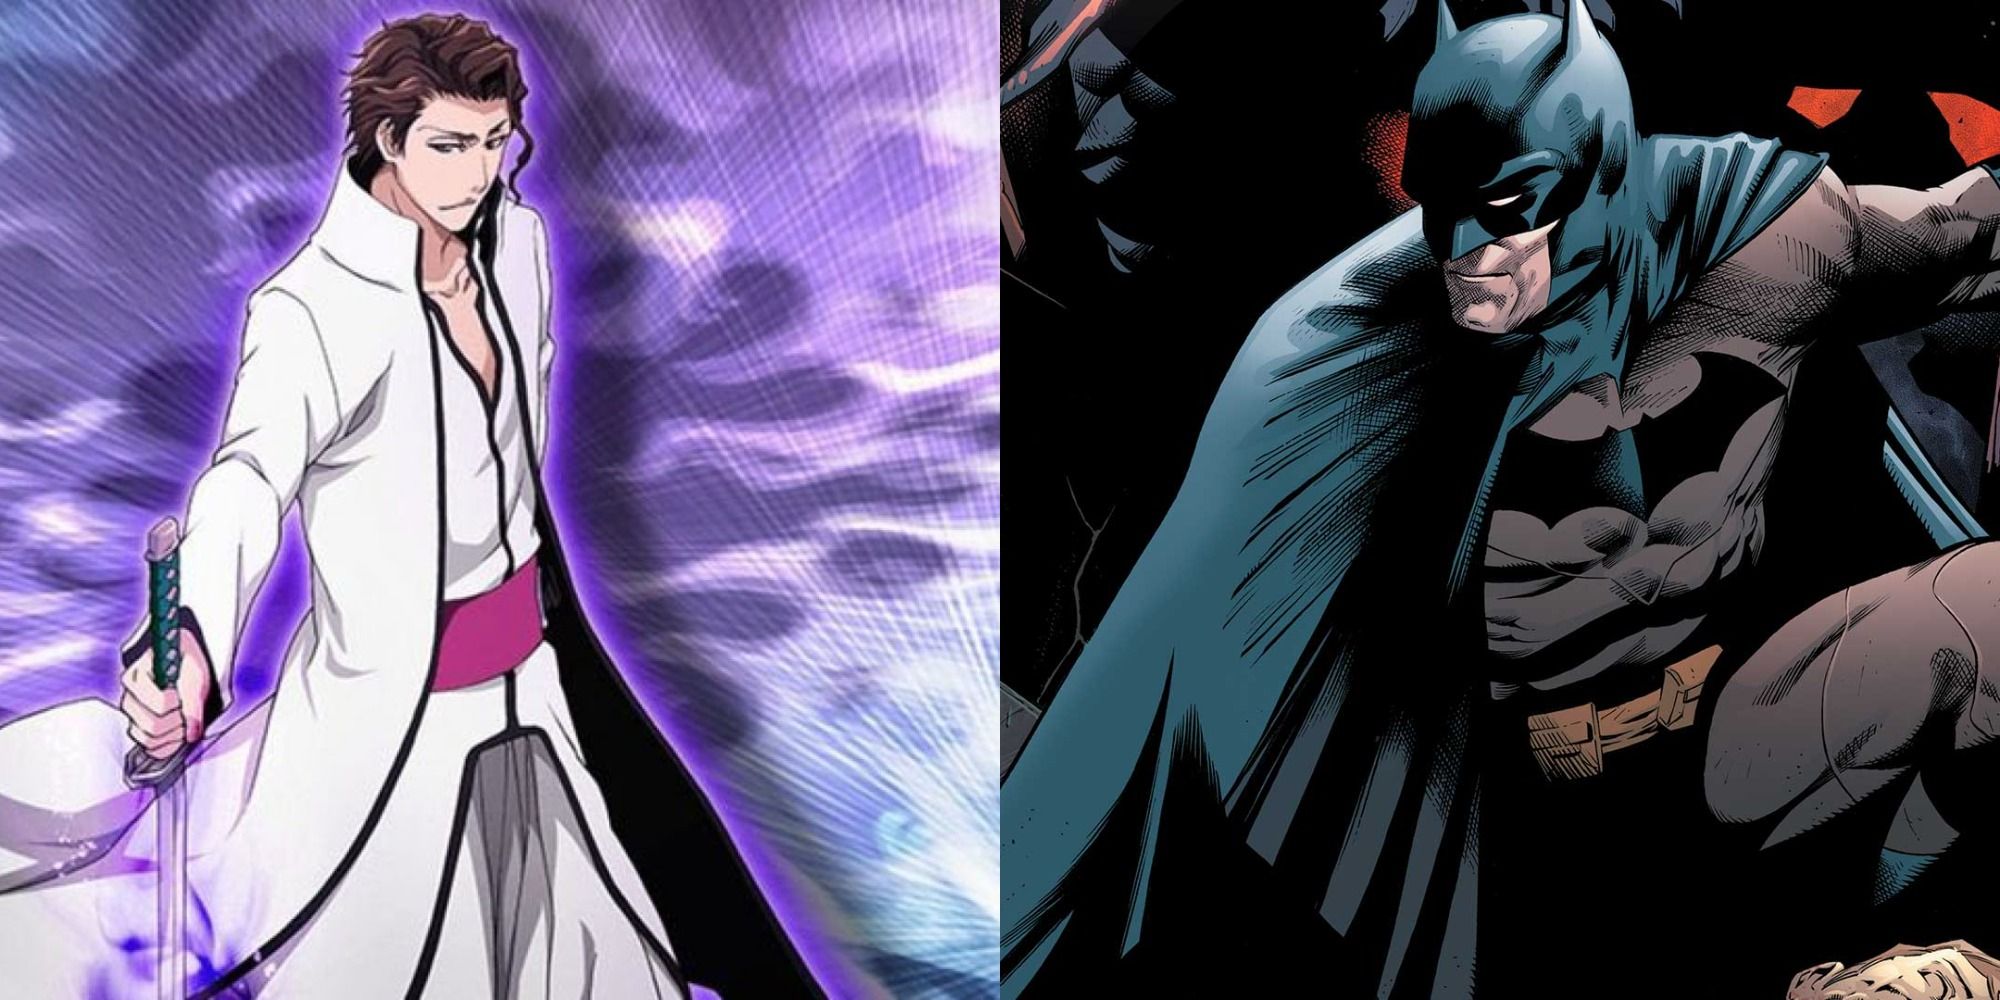 5 Anime Heroes That Could Beat Batman In A Fight (& 5 Ways Batman Could Win)